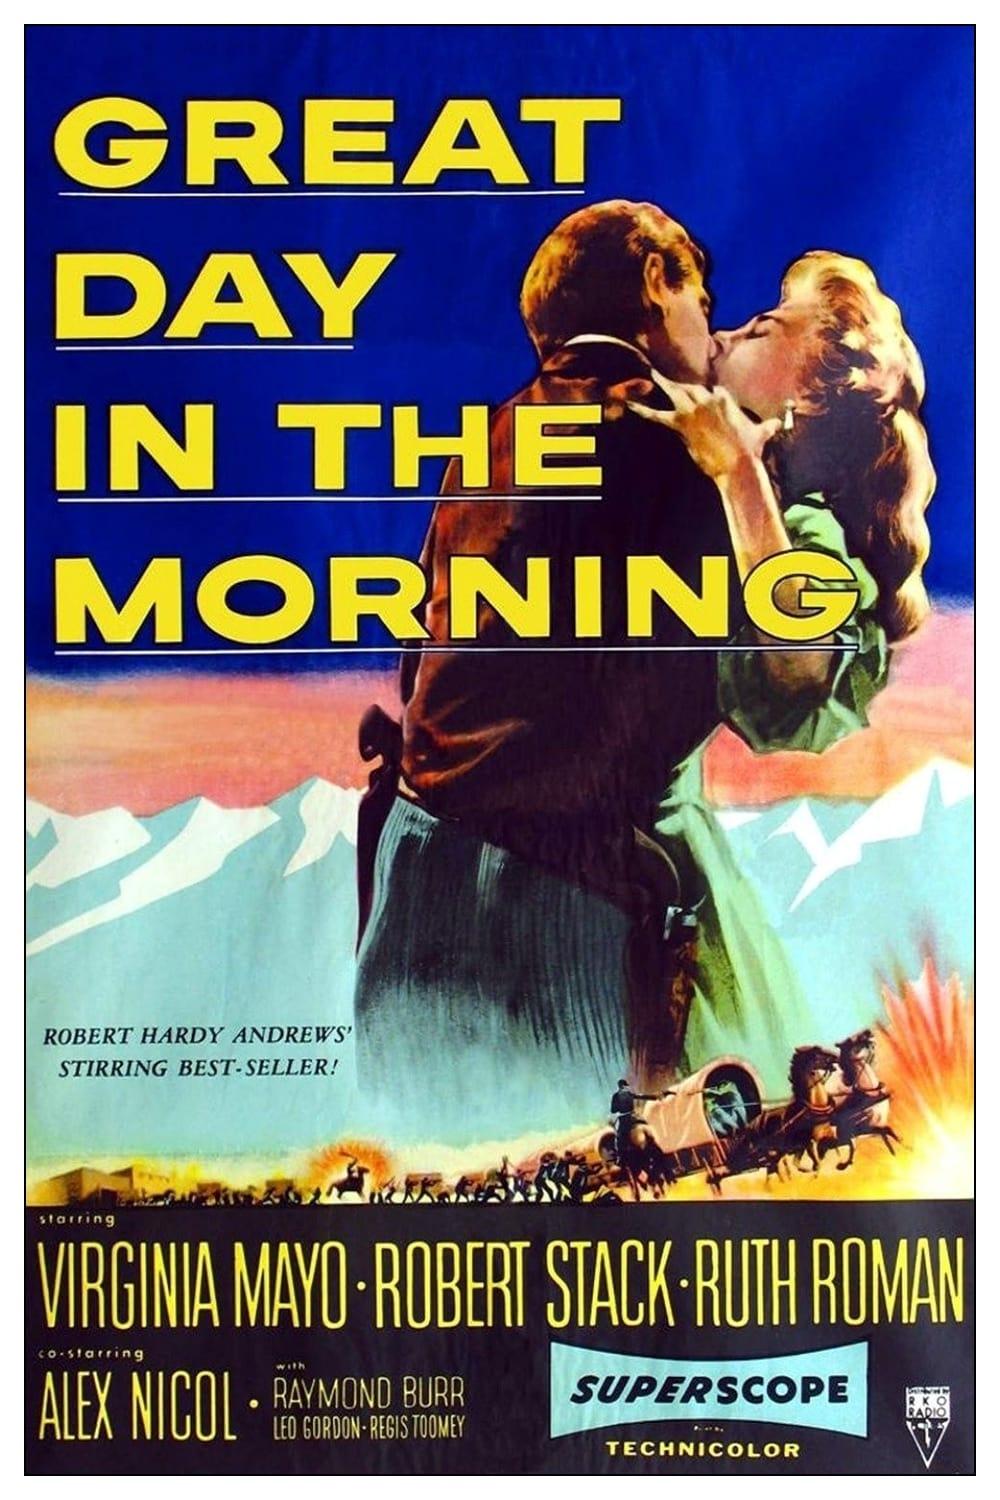 Great Day in the Morning poster